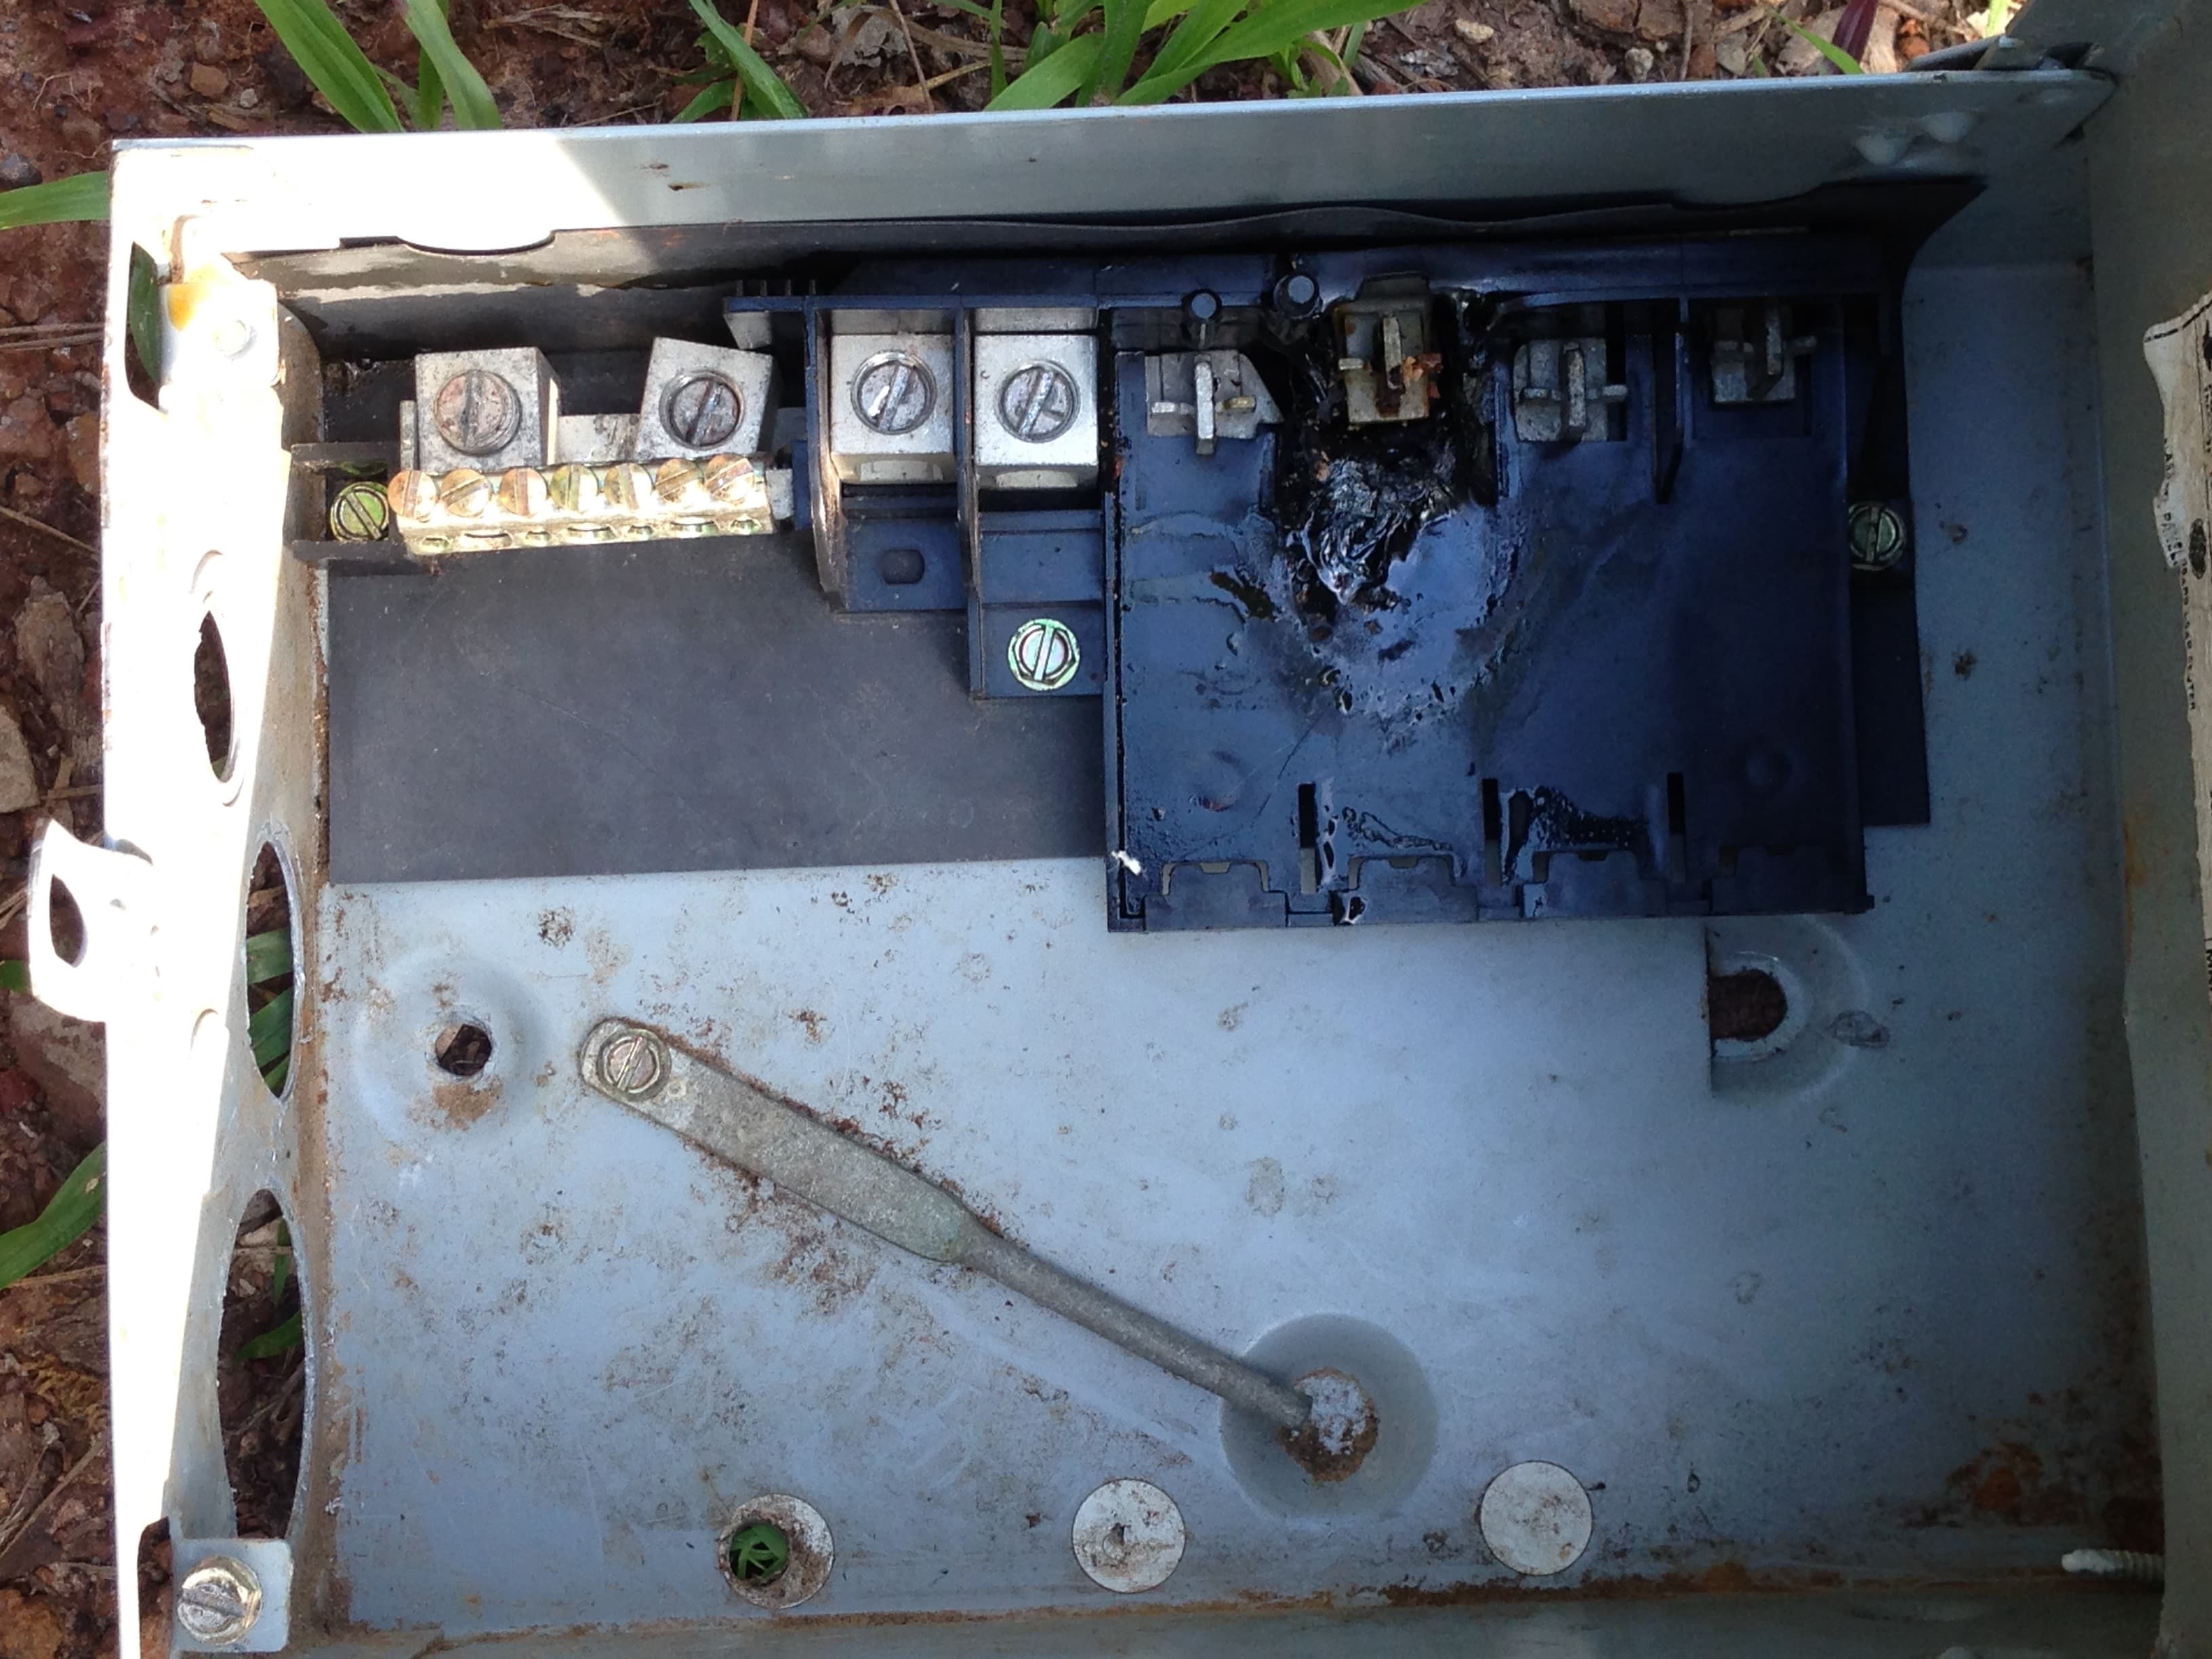 This is the old electrical box that came with the house. It burned up when we attempted to use it.